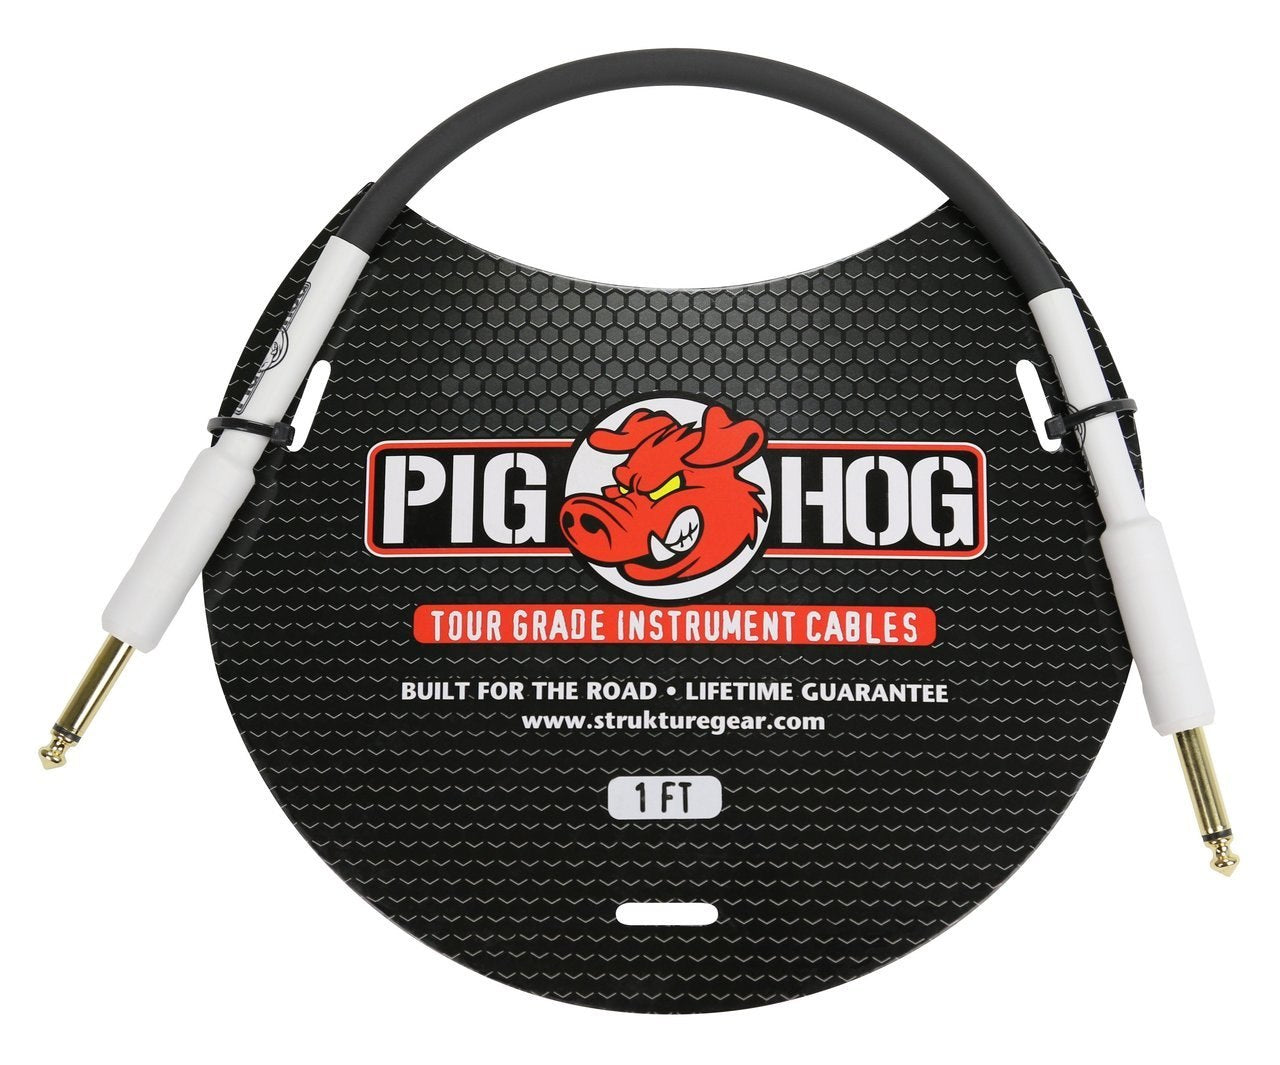 Pig Hog Cables Instrument Cable 1ft, 1/4" - 1/4"